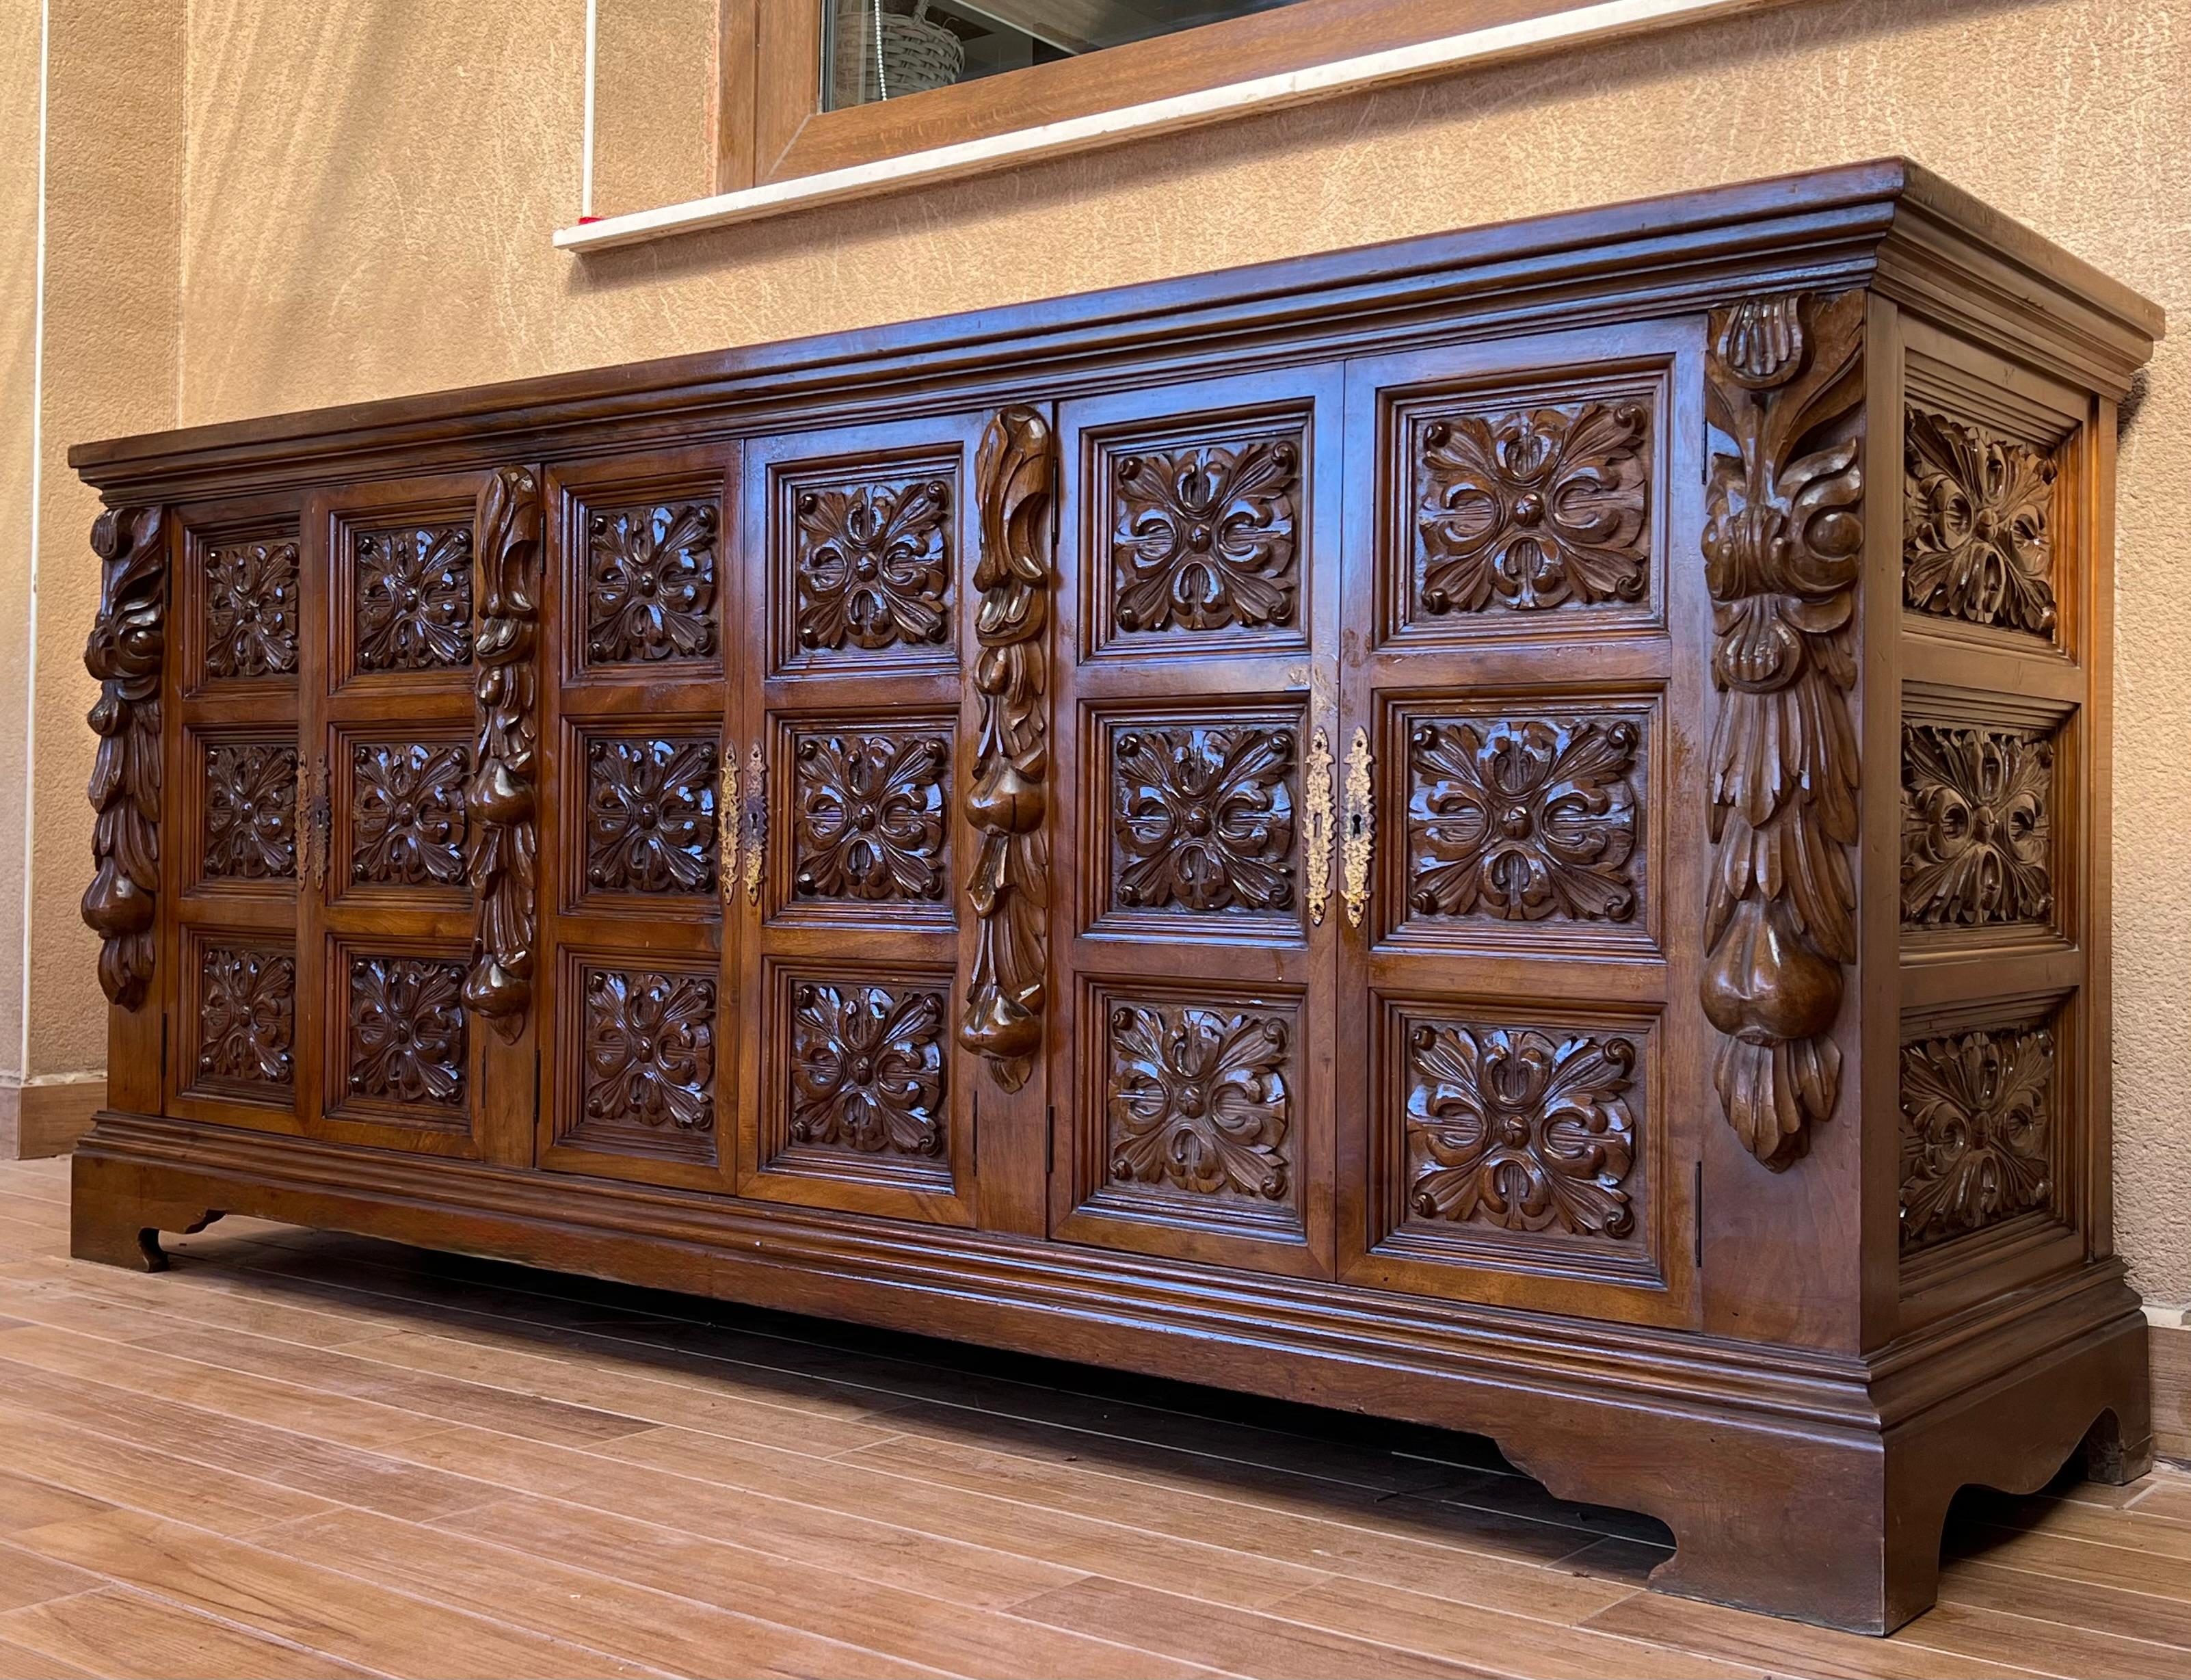 19th Century Antique Spanish Carved Walnut Sideboard with Florals Reliefs, circa 1870-1880 For Sale